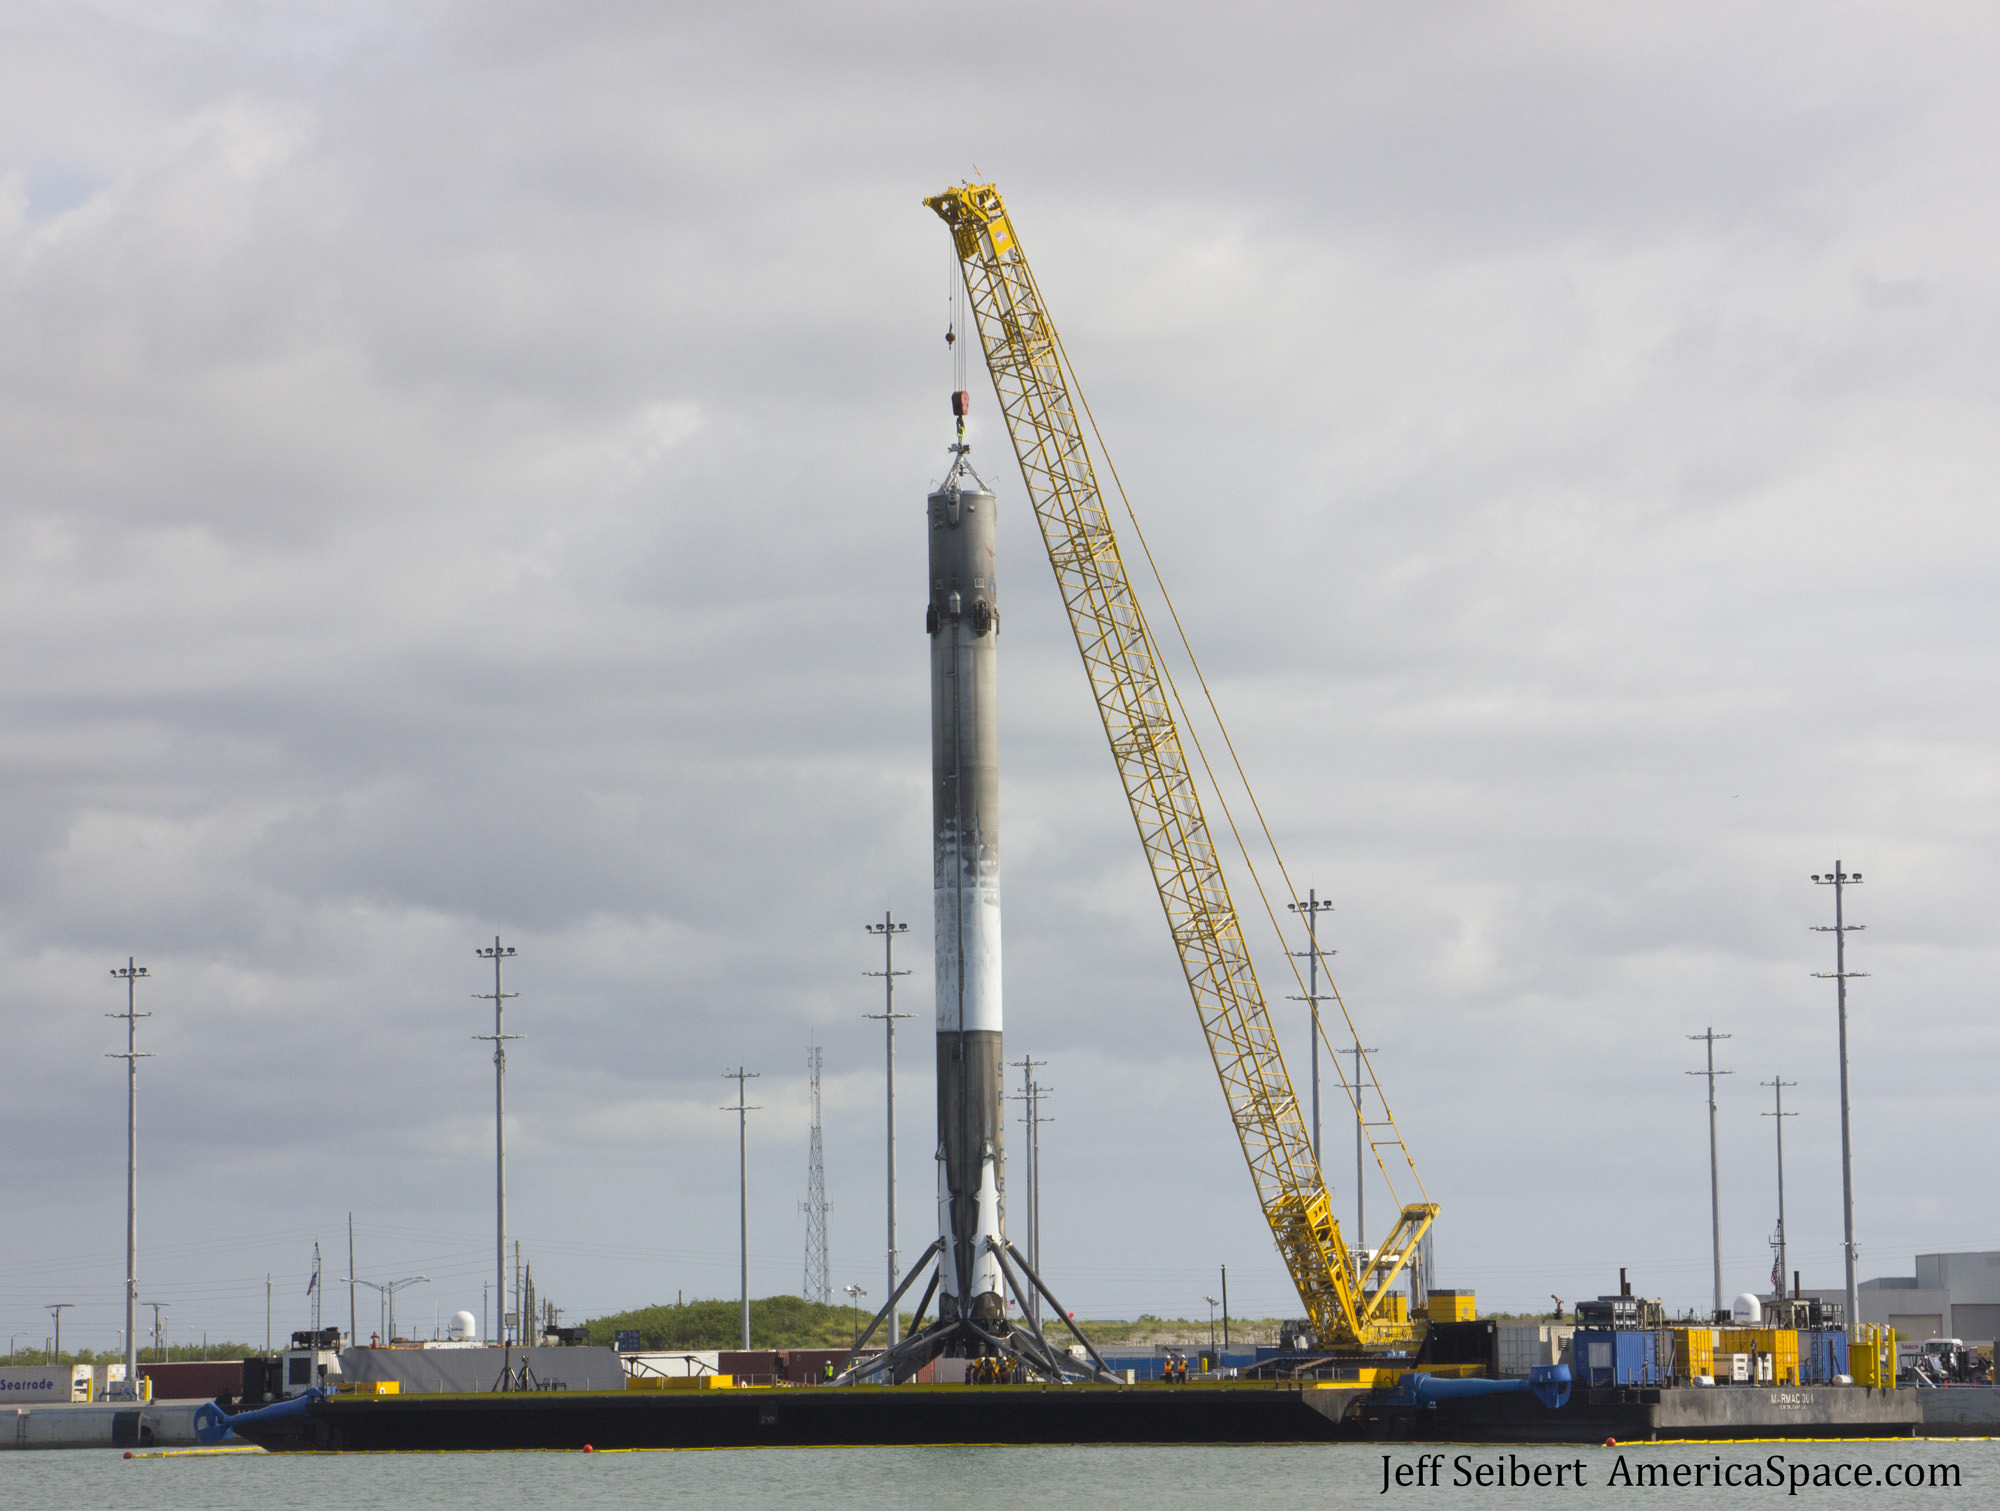 First stage booster from the SpaceX JCSAT-14 launch was moved by crane on May 11, 2016 from the drone ship OCISLY to a work pedestal on land 12 hours after arriving back in Port Canaveral, Florida.  Credit: Jeff Seibert/AmericaSpace 